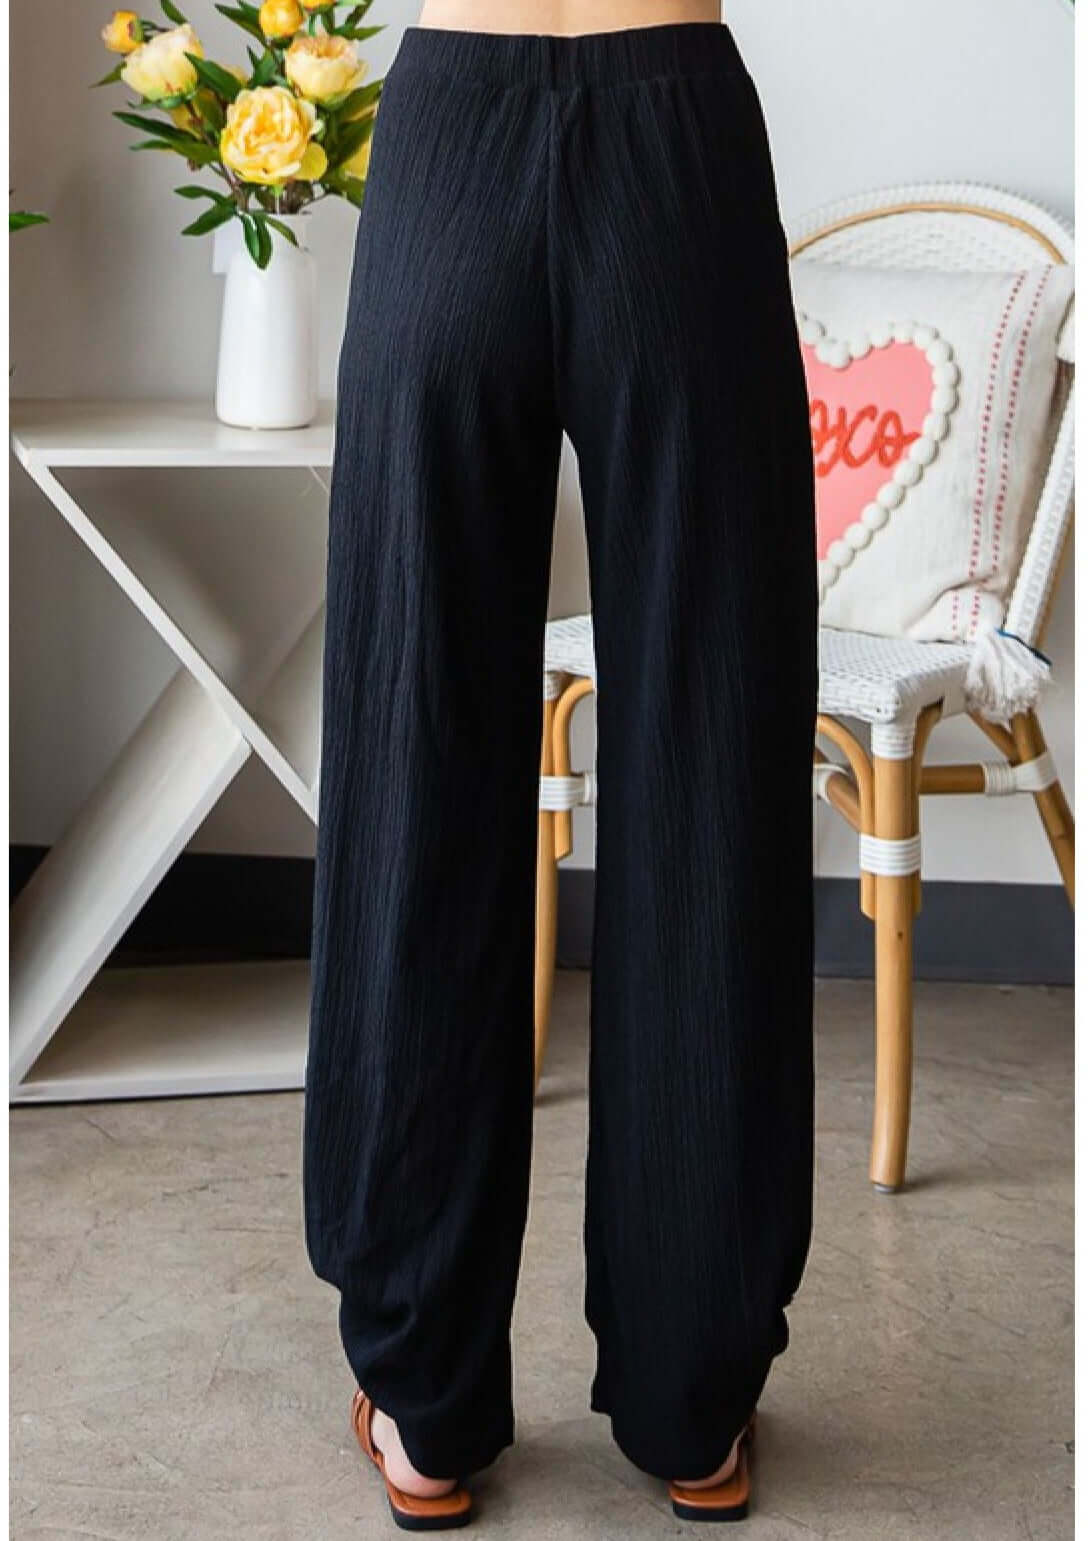 Lady's Crinkle Texture Tie Hem Pants with Pockets in Black | Made in USA | Boho style casual pants | Classy Cozy Cool Women's Made in America Clothing Boutique